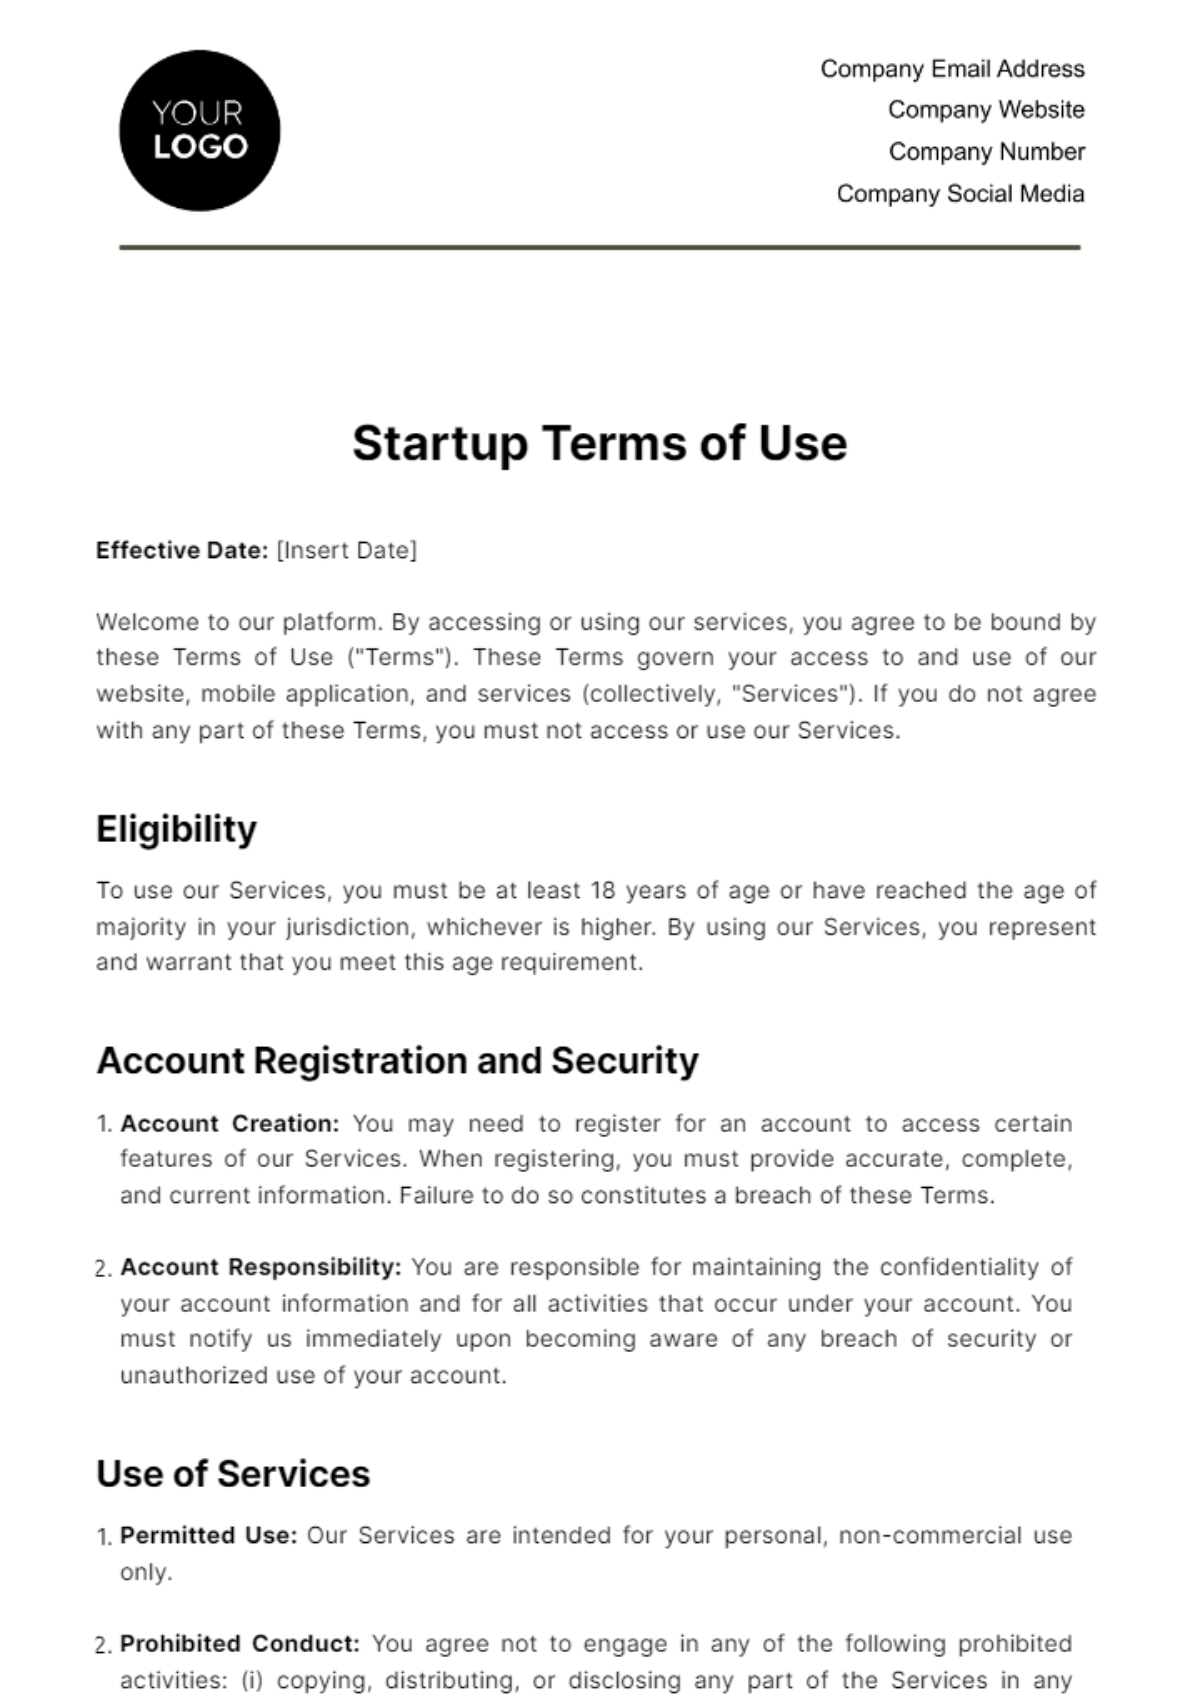 Free Startup Terms of Use Template